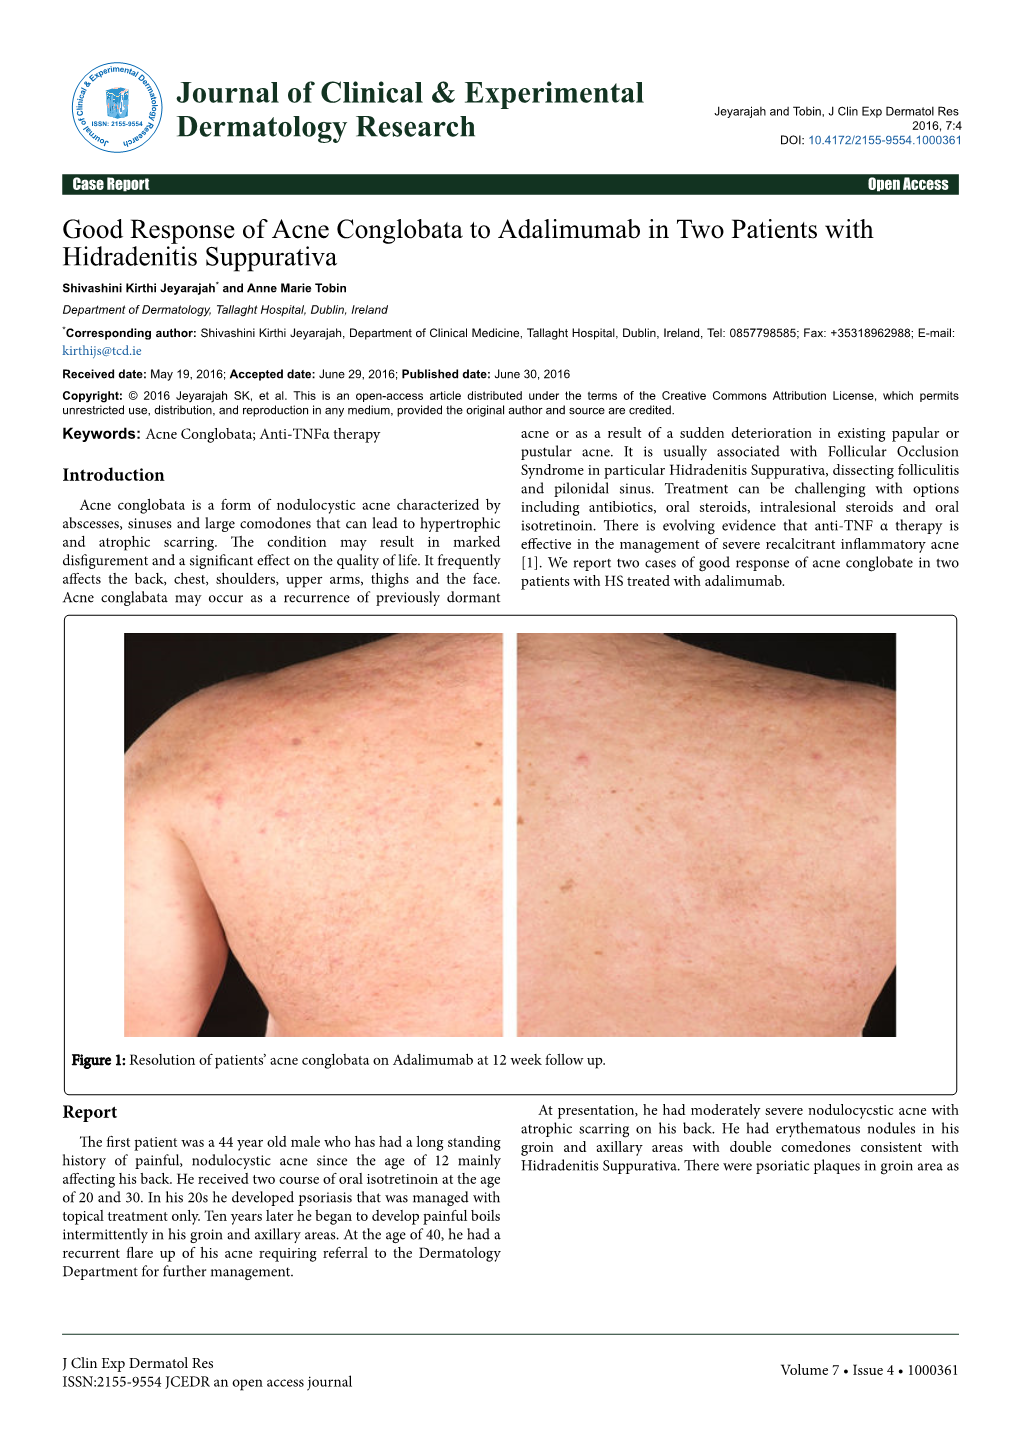 Good Response of Acne Conglobata to Adalimumab in Two Patients With